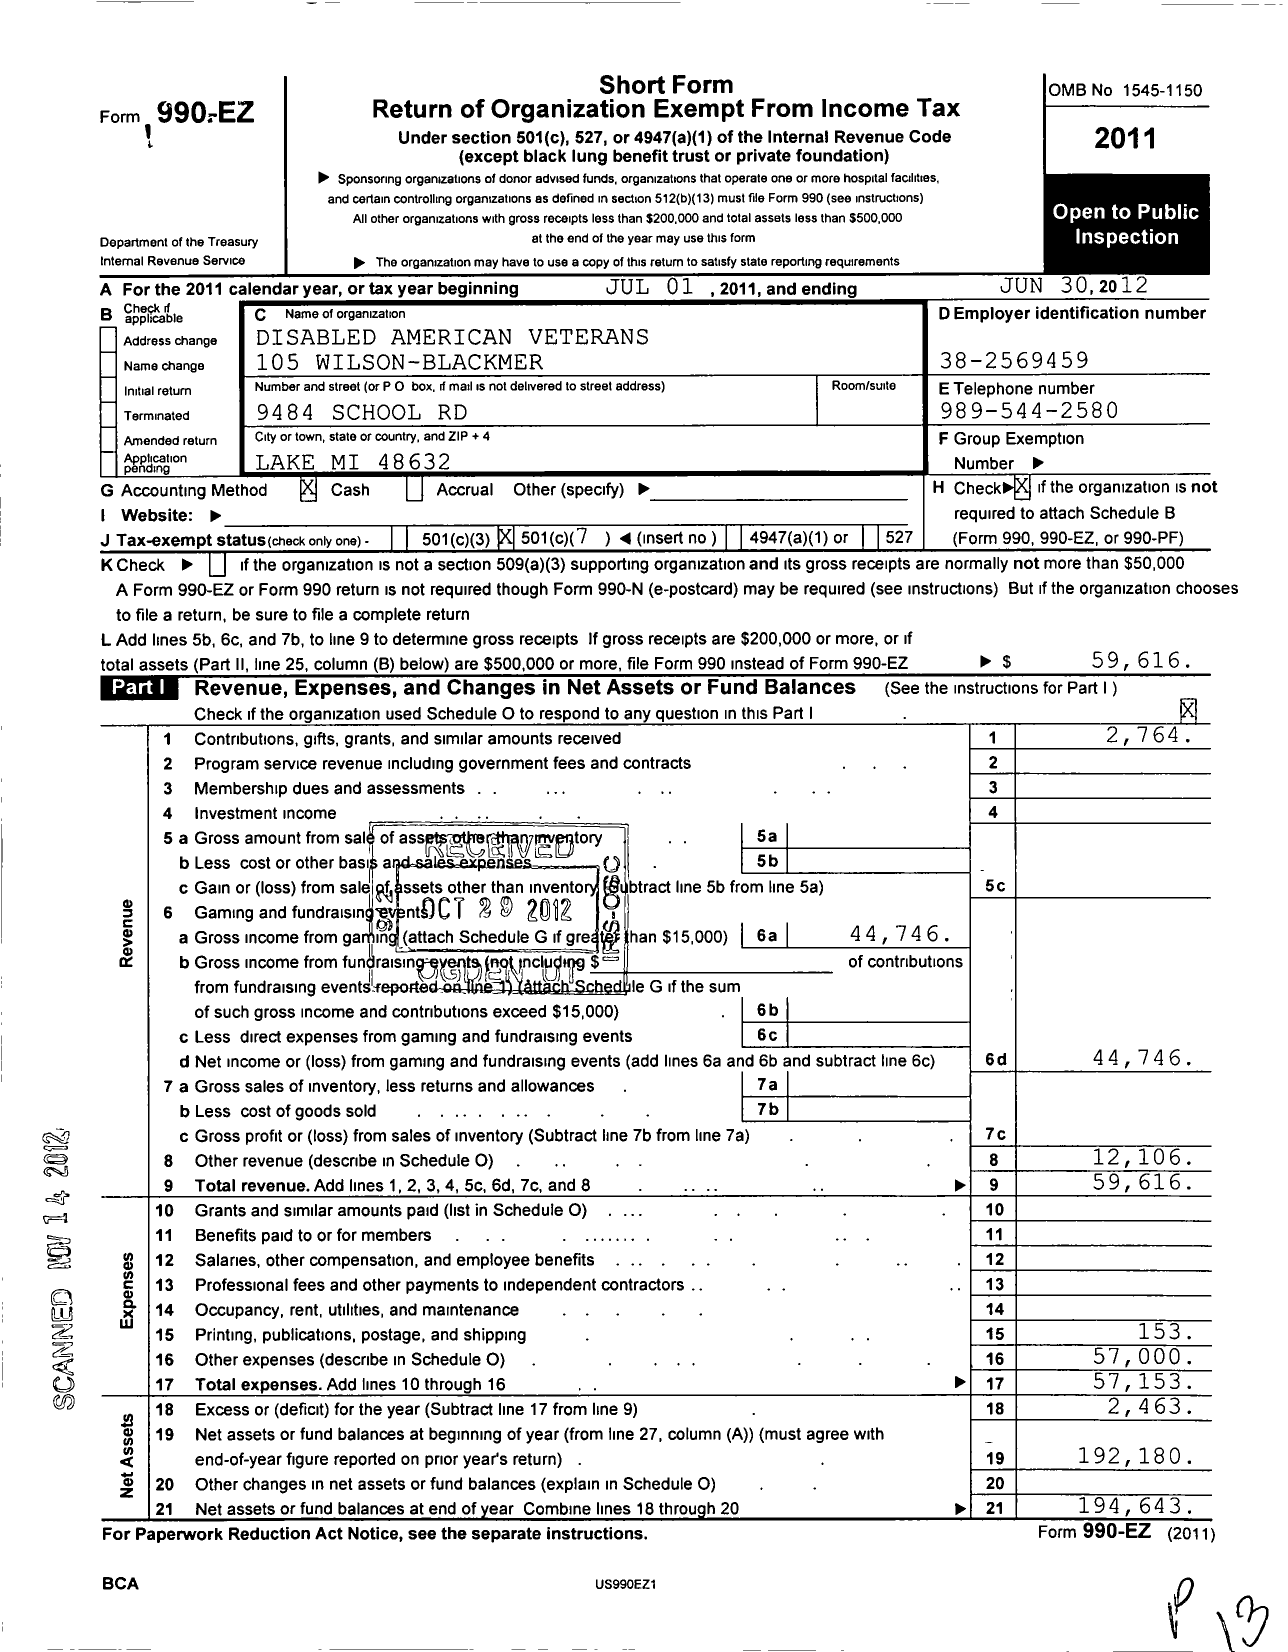 Image of first page of 2011 Form 990EO for Disabled American Veterans - 105 Wilson-Blackmer